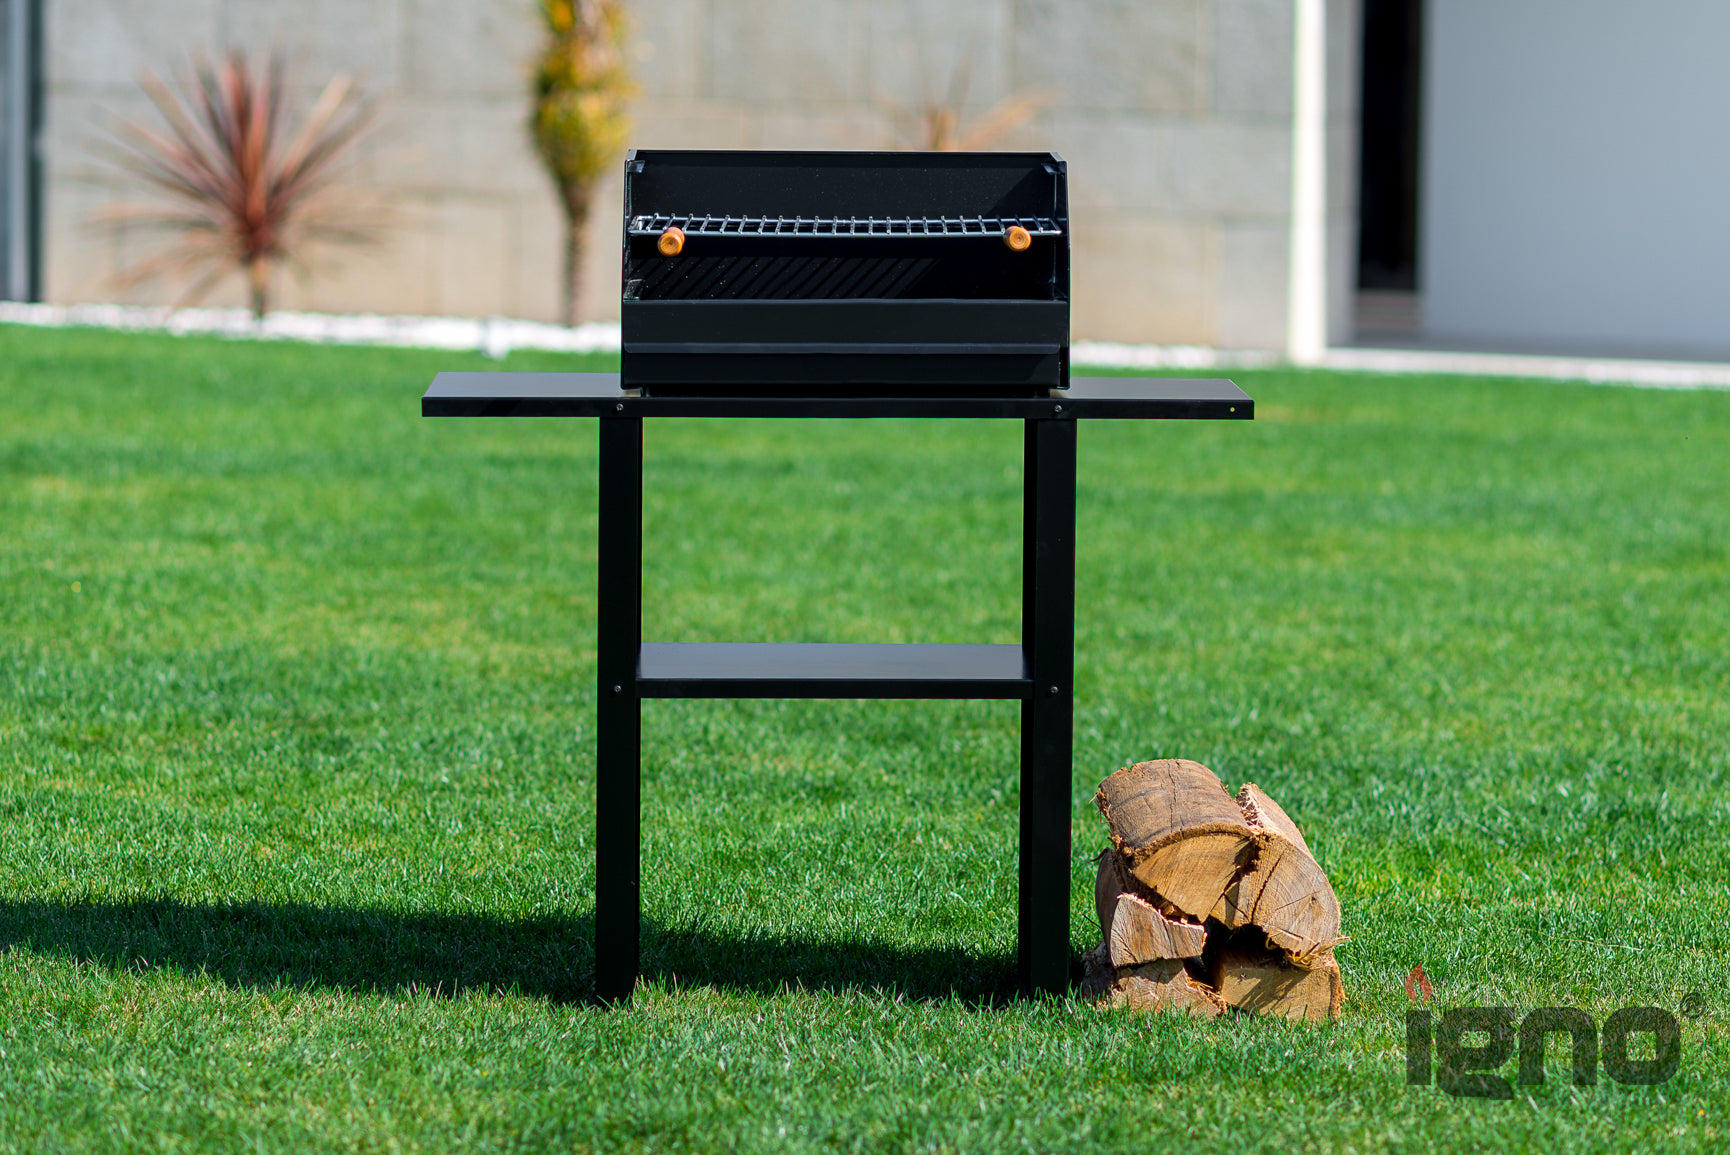 Extra Grill für Barbecues